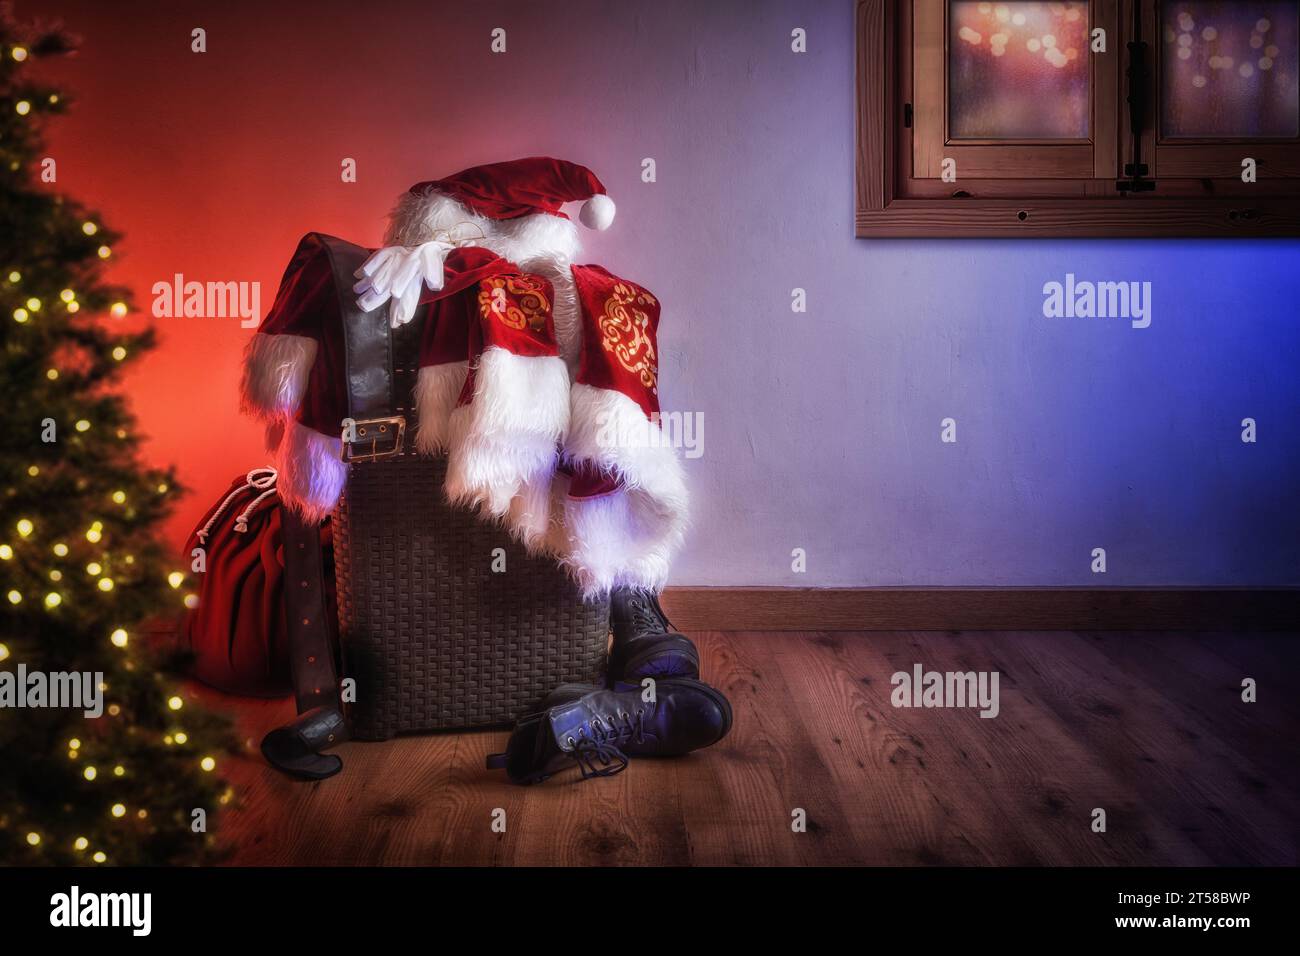 Santa Claus clothes and sack with gifts on Christmas Eve in a wooden room with a tree with lights and a window ready to distribute. Stock Photo